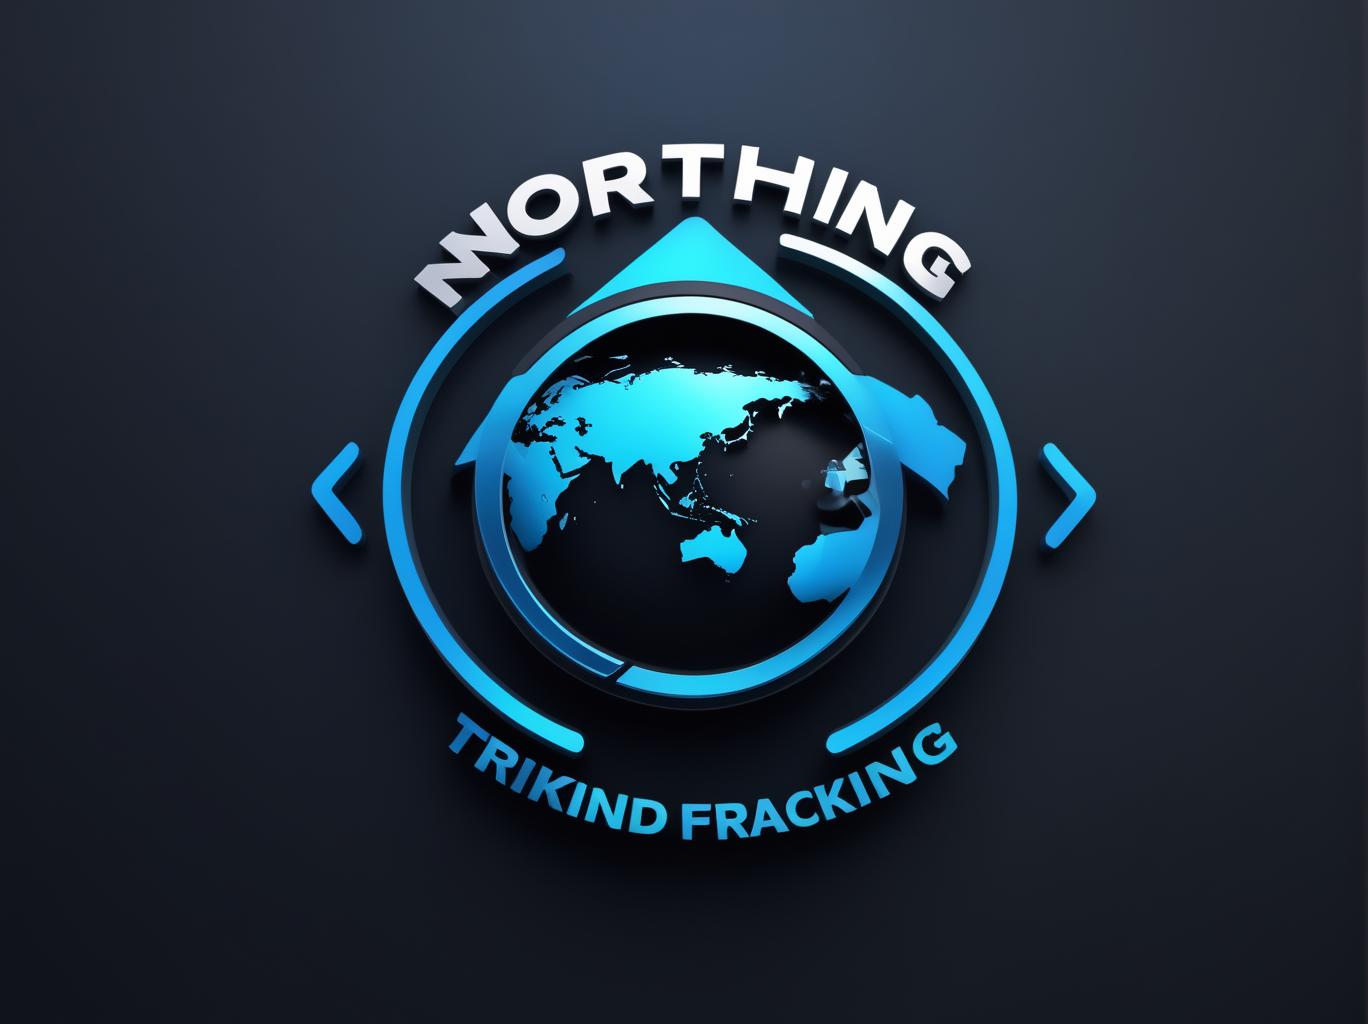  Logo, (threeDRender style), create an image with northing and vehicle tracking